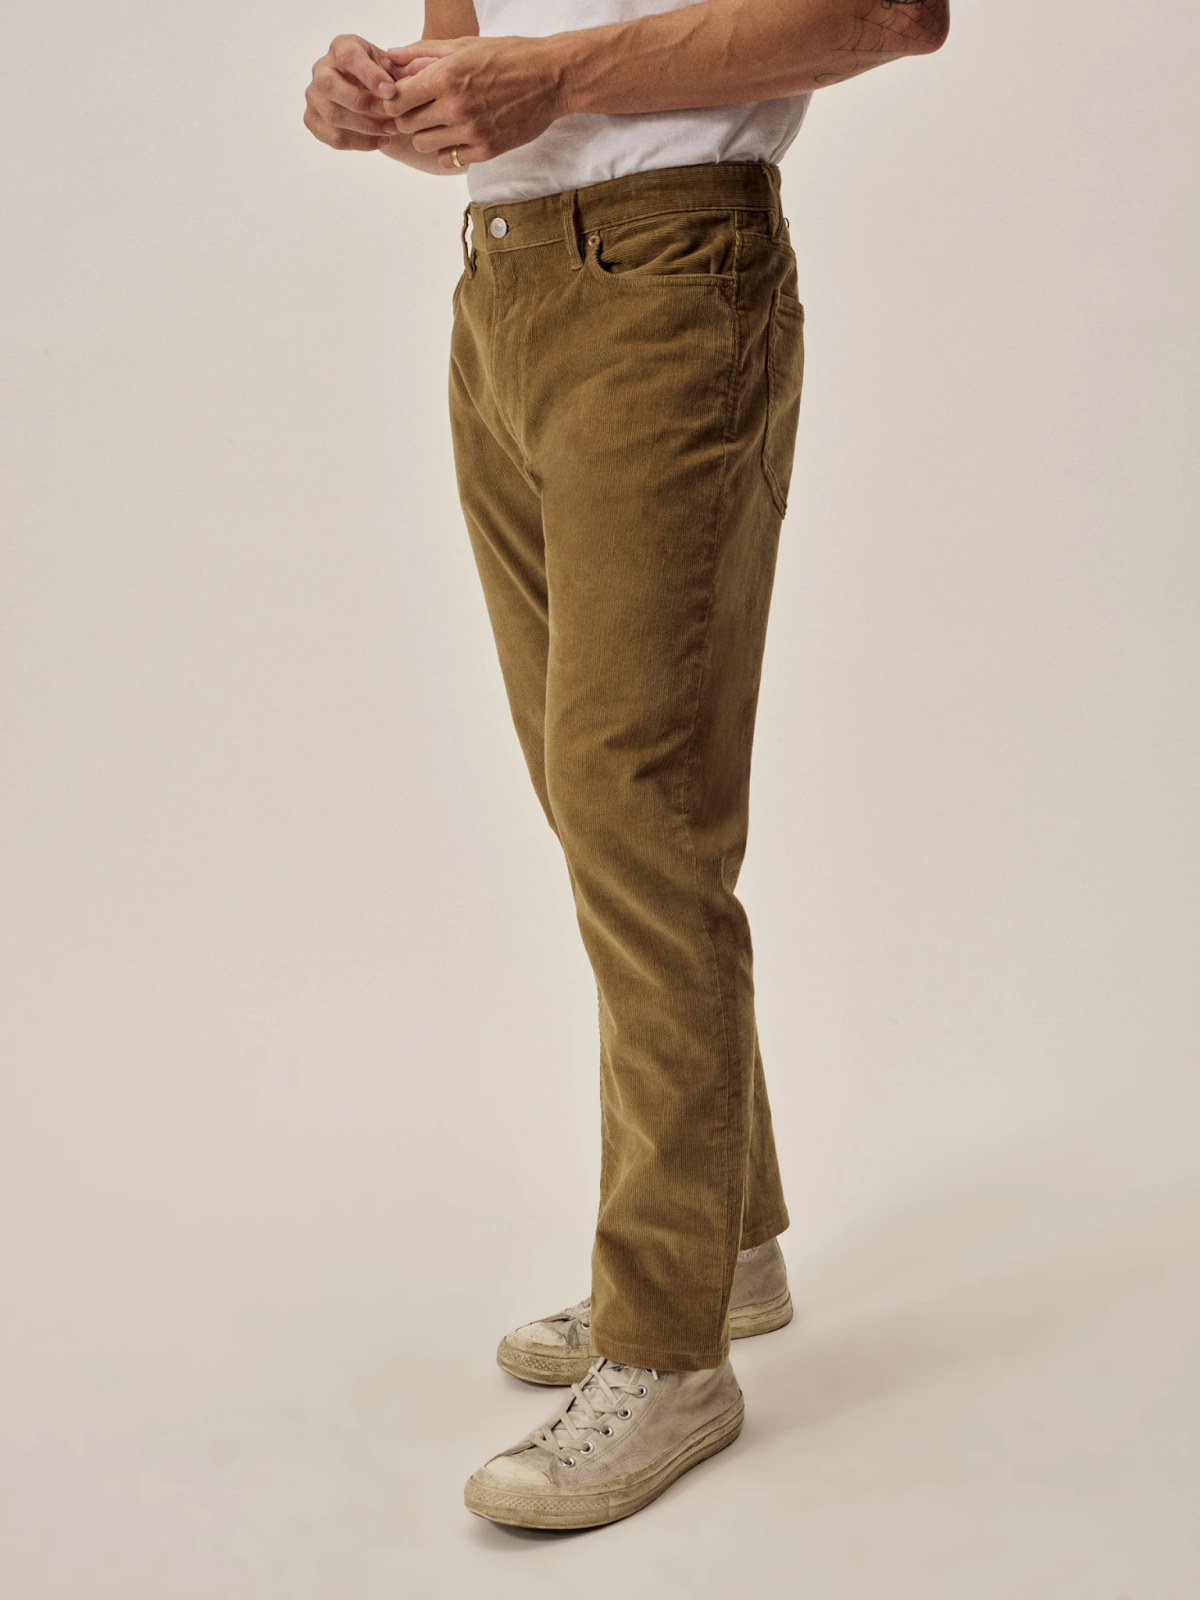 a person wearing corduroy pants with white lace up sneakers